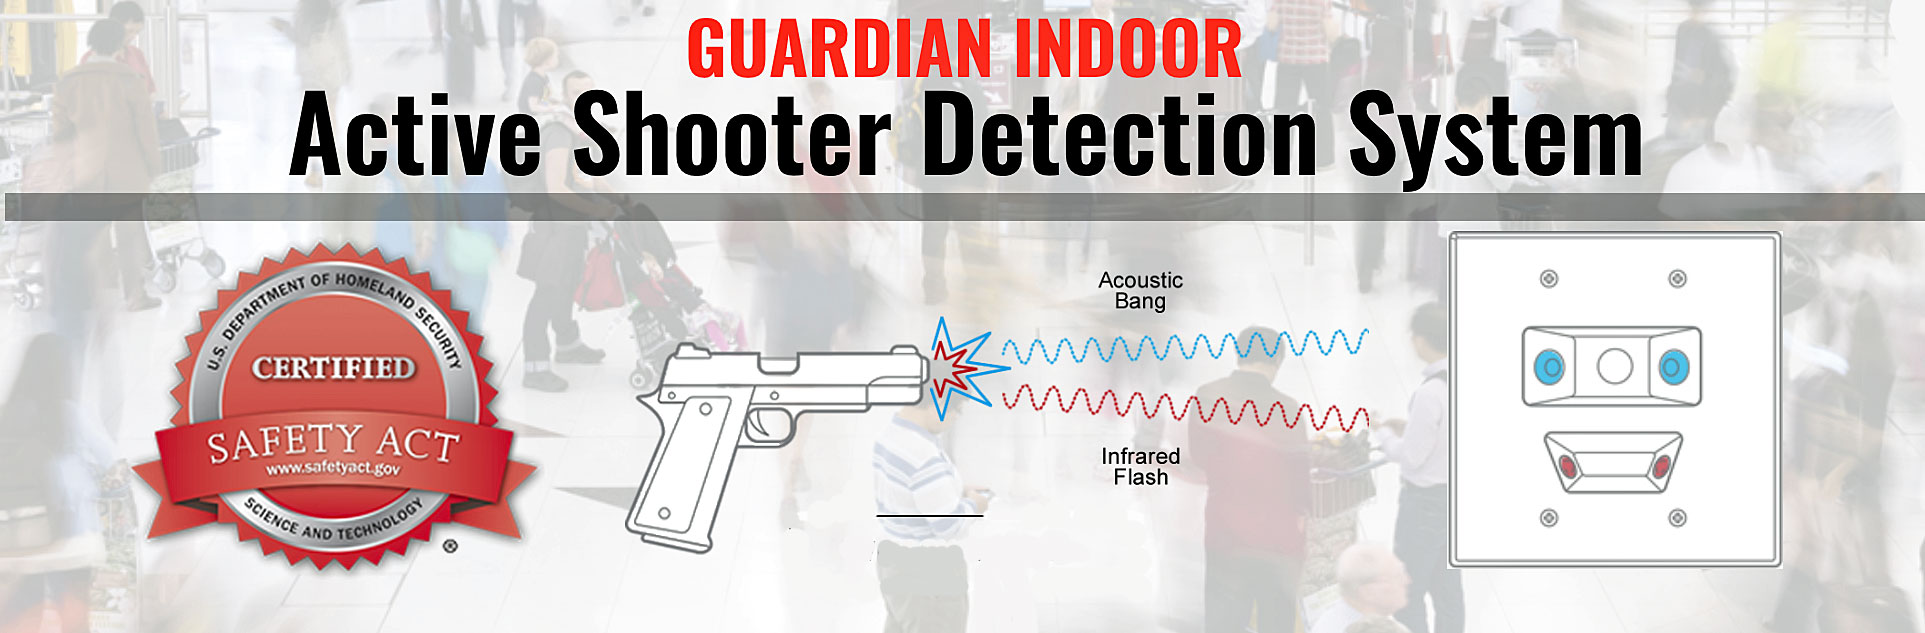 The Guardian Indoor Active Shooter Detection System incorporates acoustic gunshot identification software combined with infrared gunfire flash detection to produce a high performing, fully automatic, and accurate gunshot detection technology. 